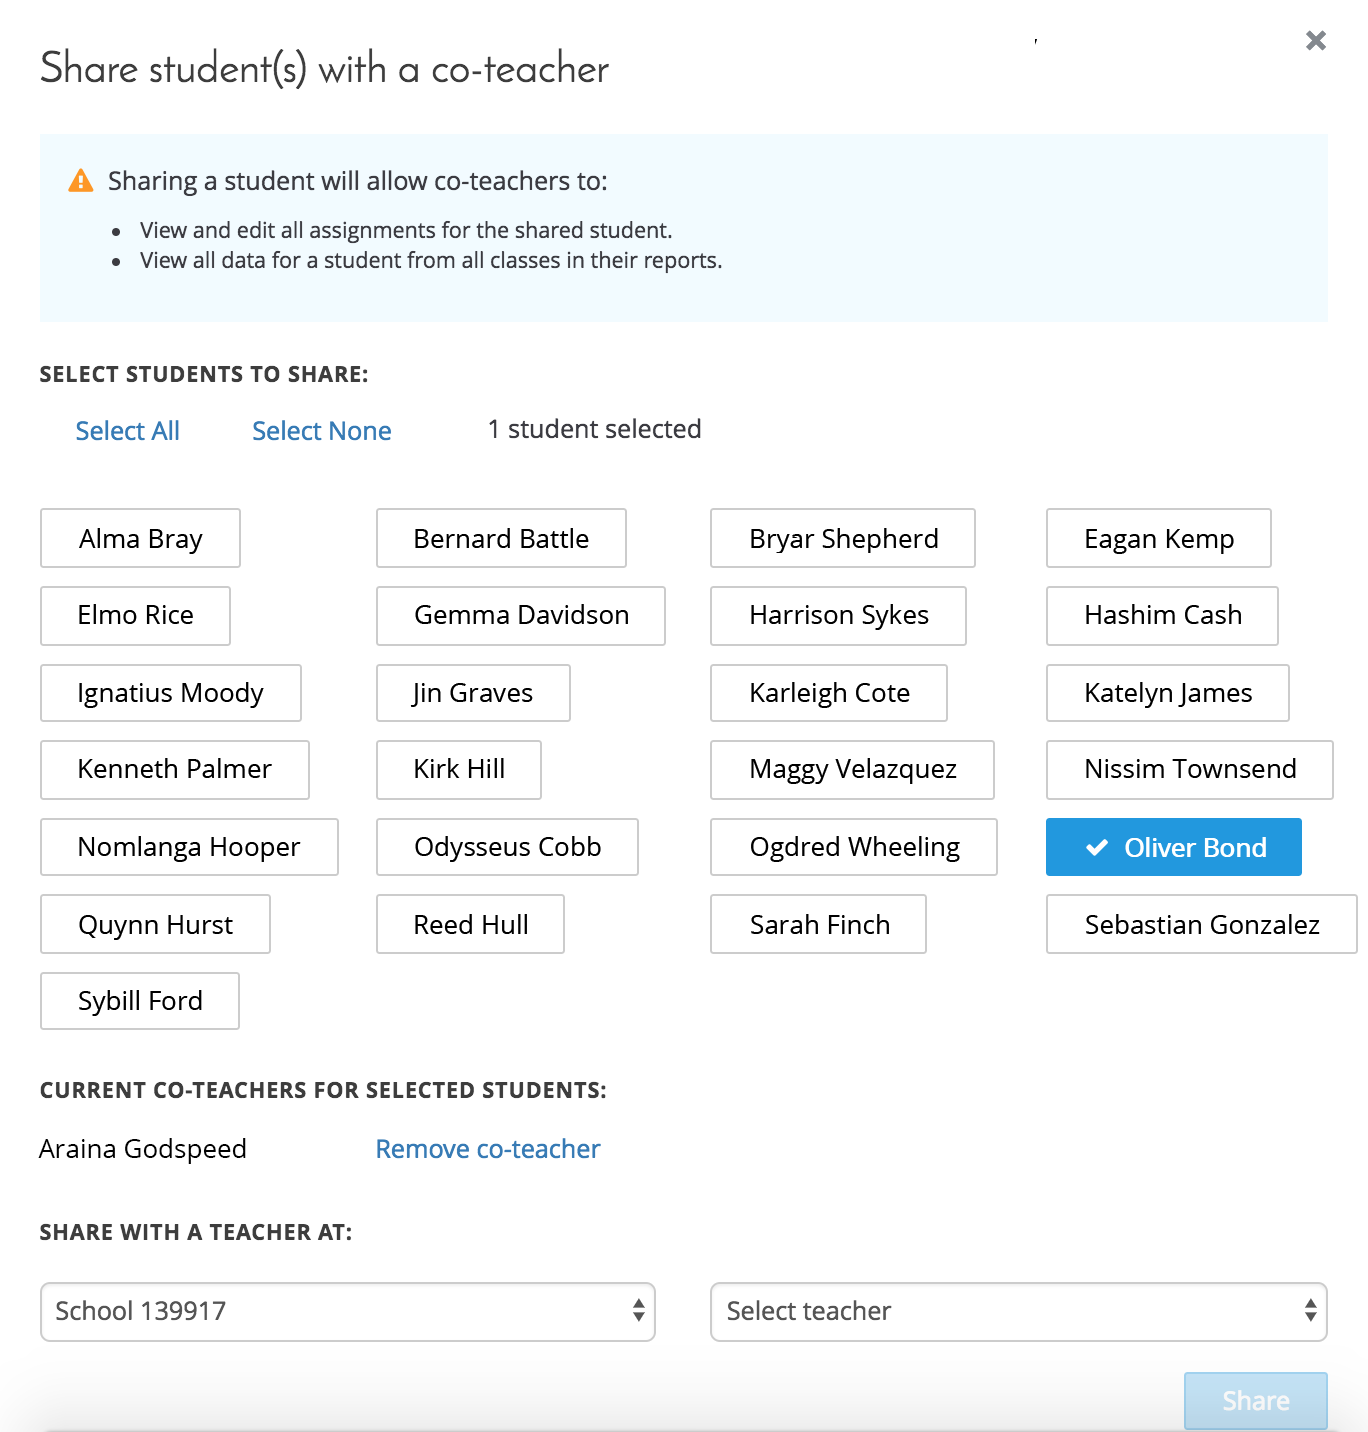 The Share students screen, with one student already selected. You can select additional students, or use the Select All and Select None links to select or deselect all the students at once. At the bottom are drop-down lists where you can select a school and teacher to share the students with. If the selected student(s) are already shared with another teacher (a co-teacher), that teacher's name is shown under the list of students. The Share button is below the drop-down lists.